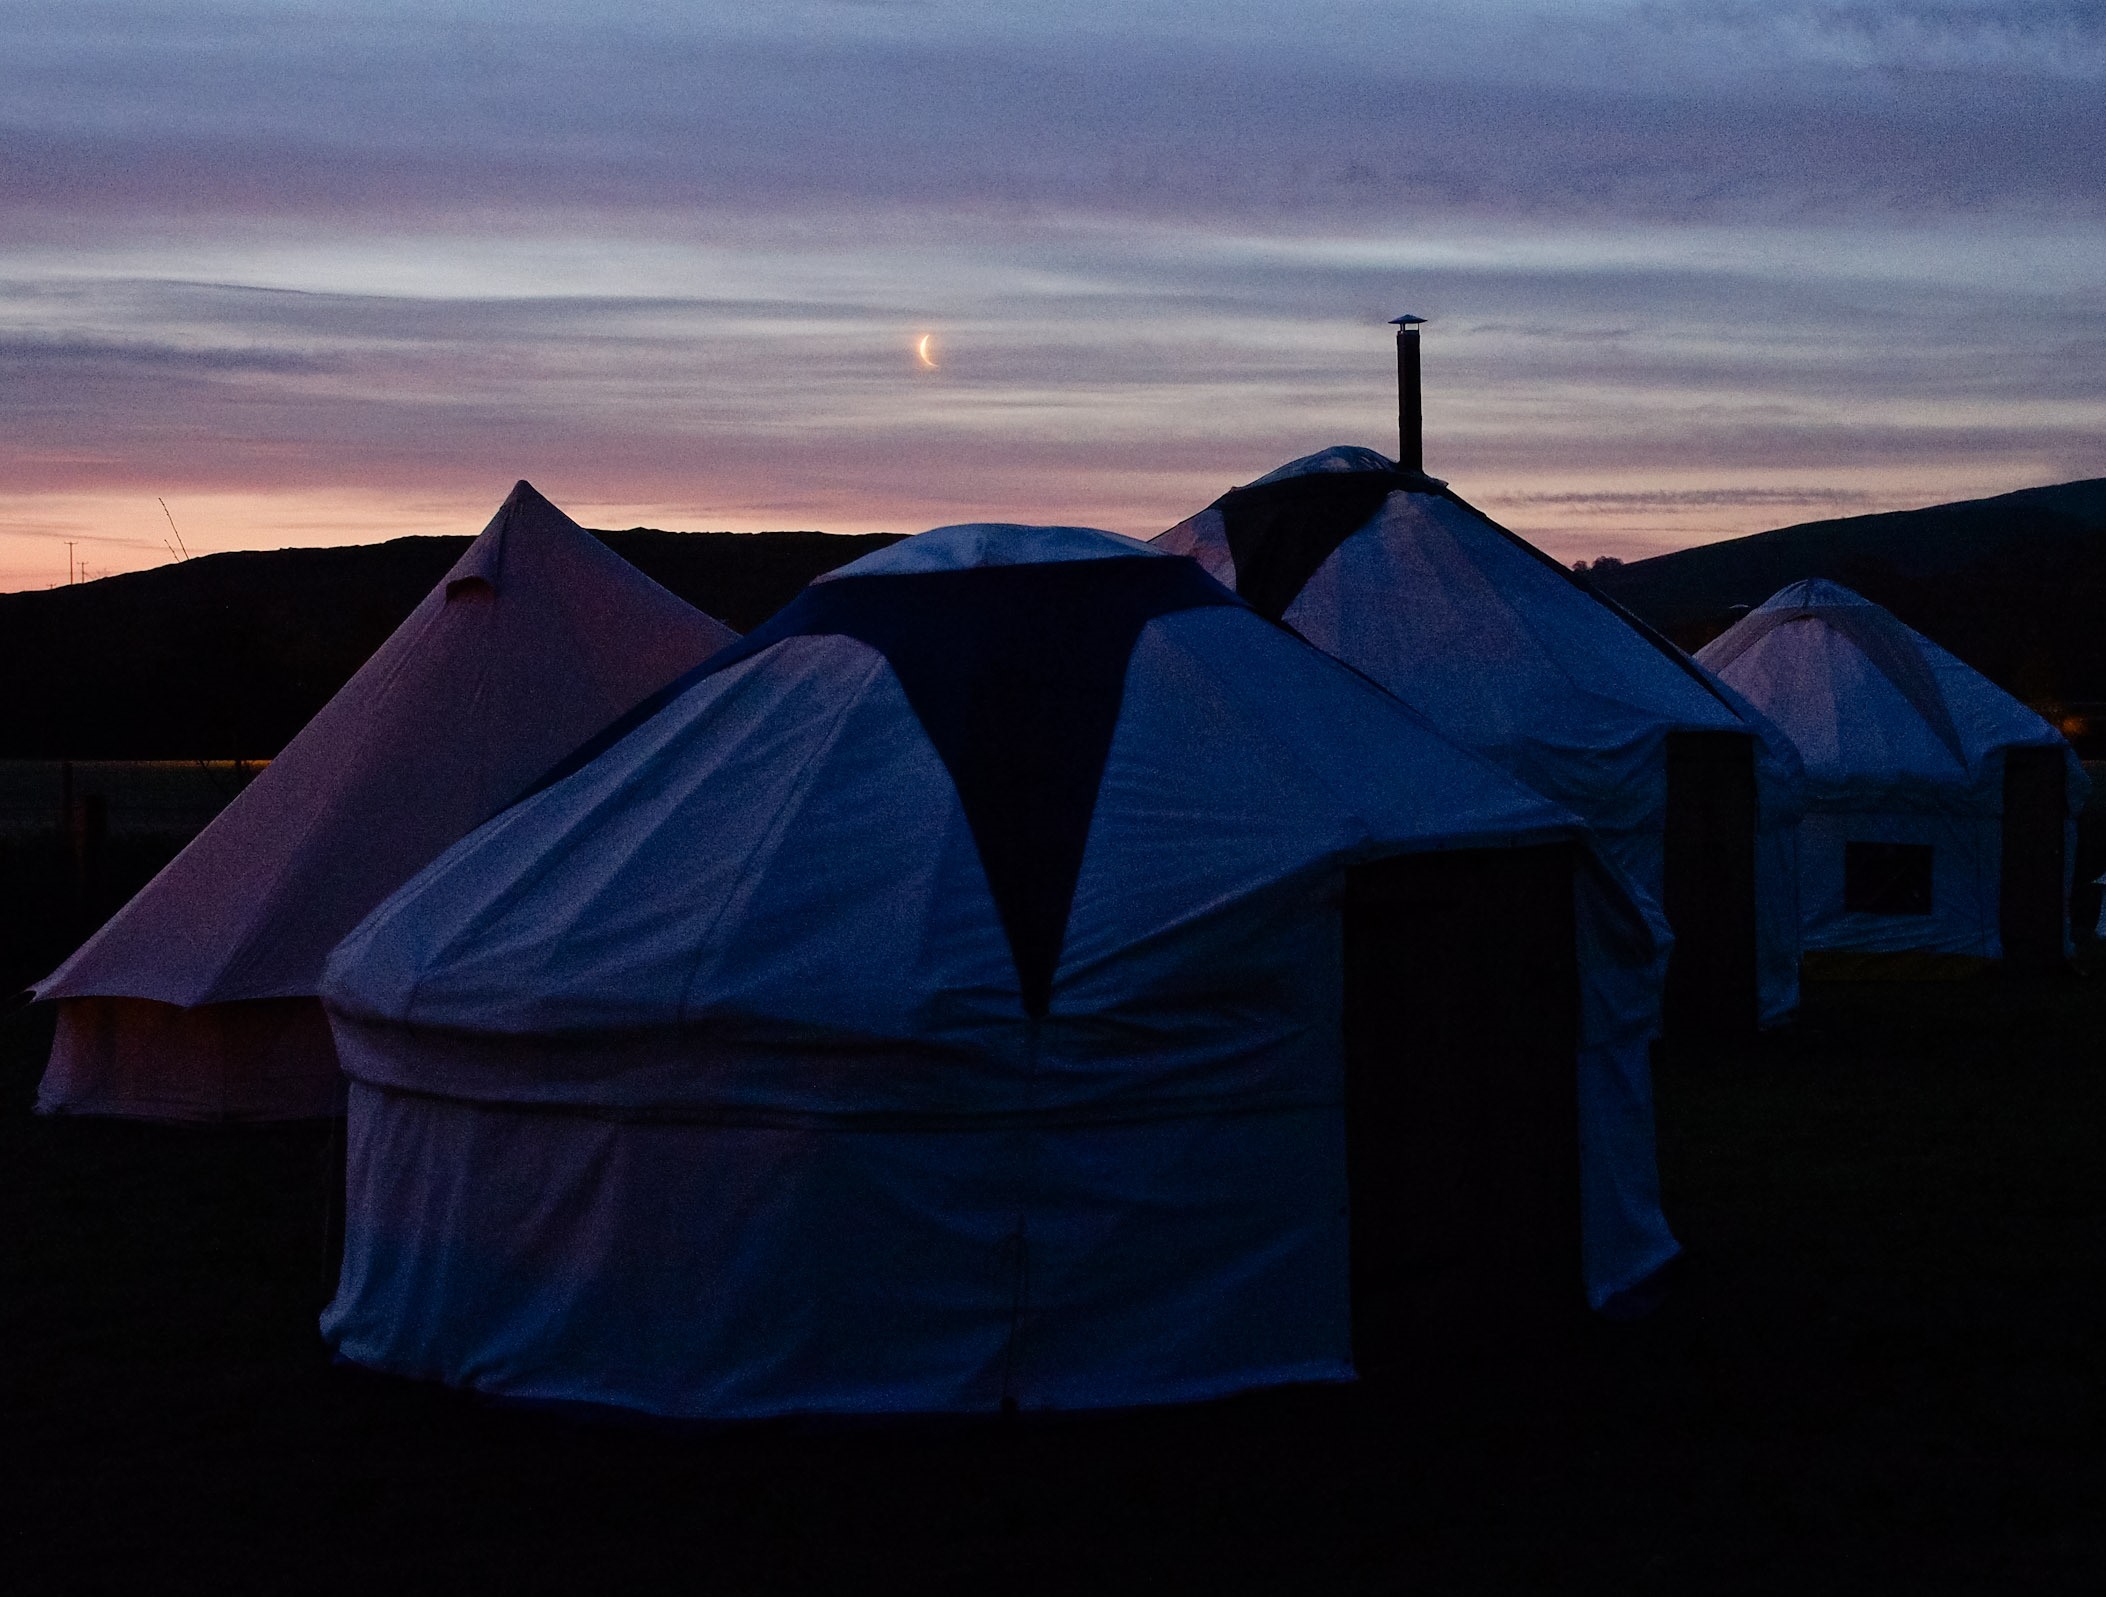 Camp in style with Fred’s Yurts